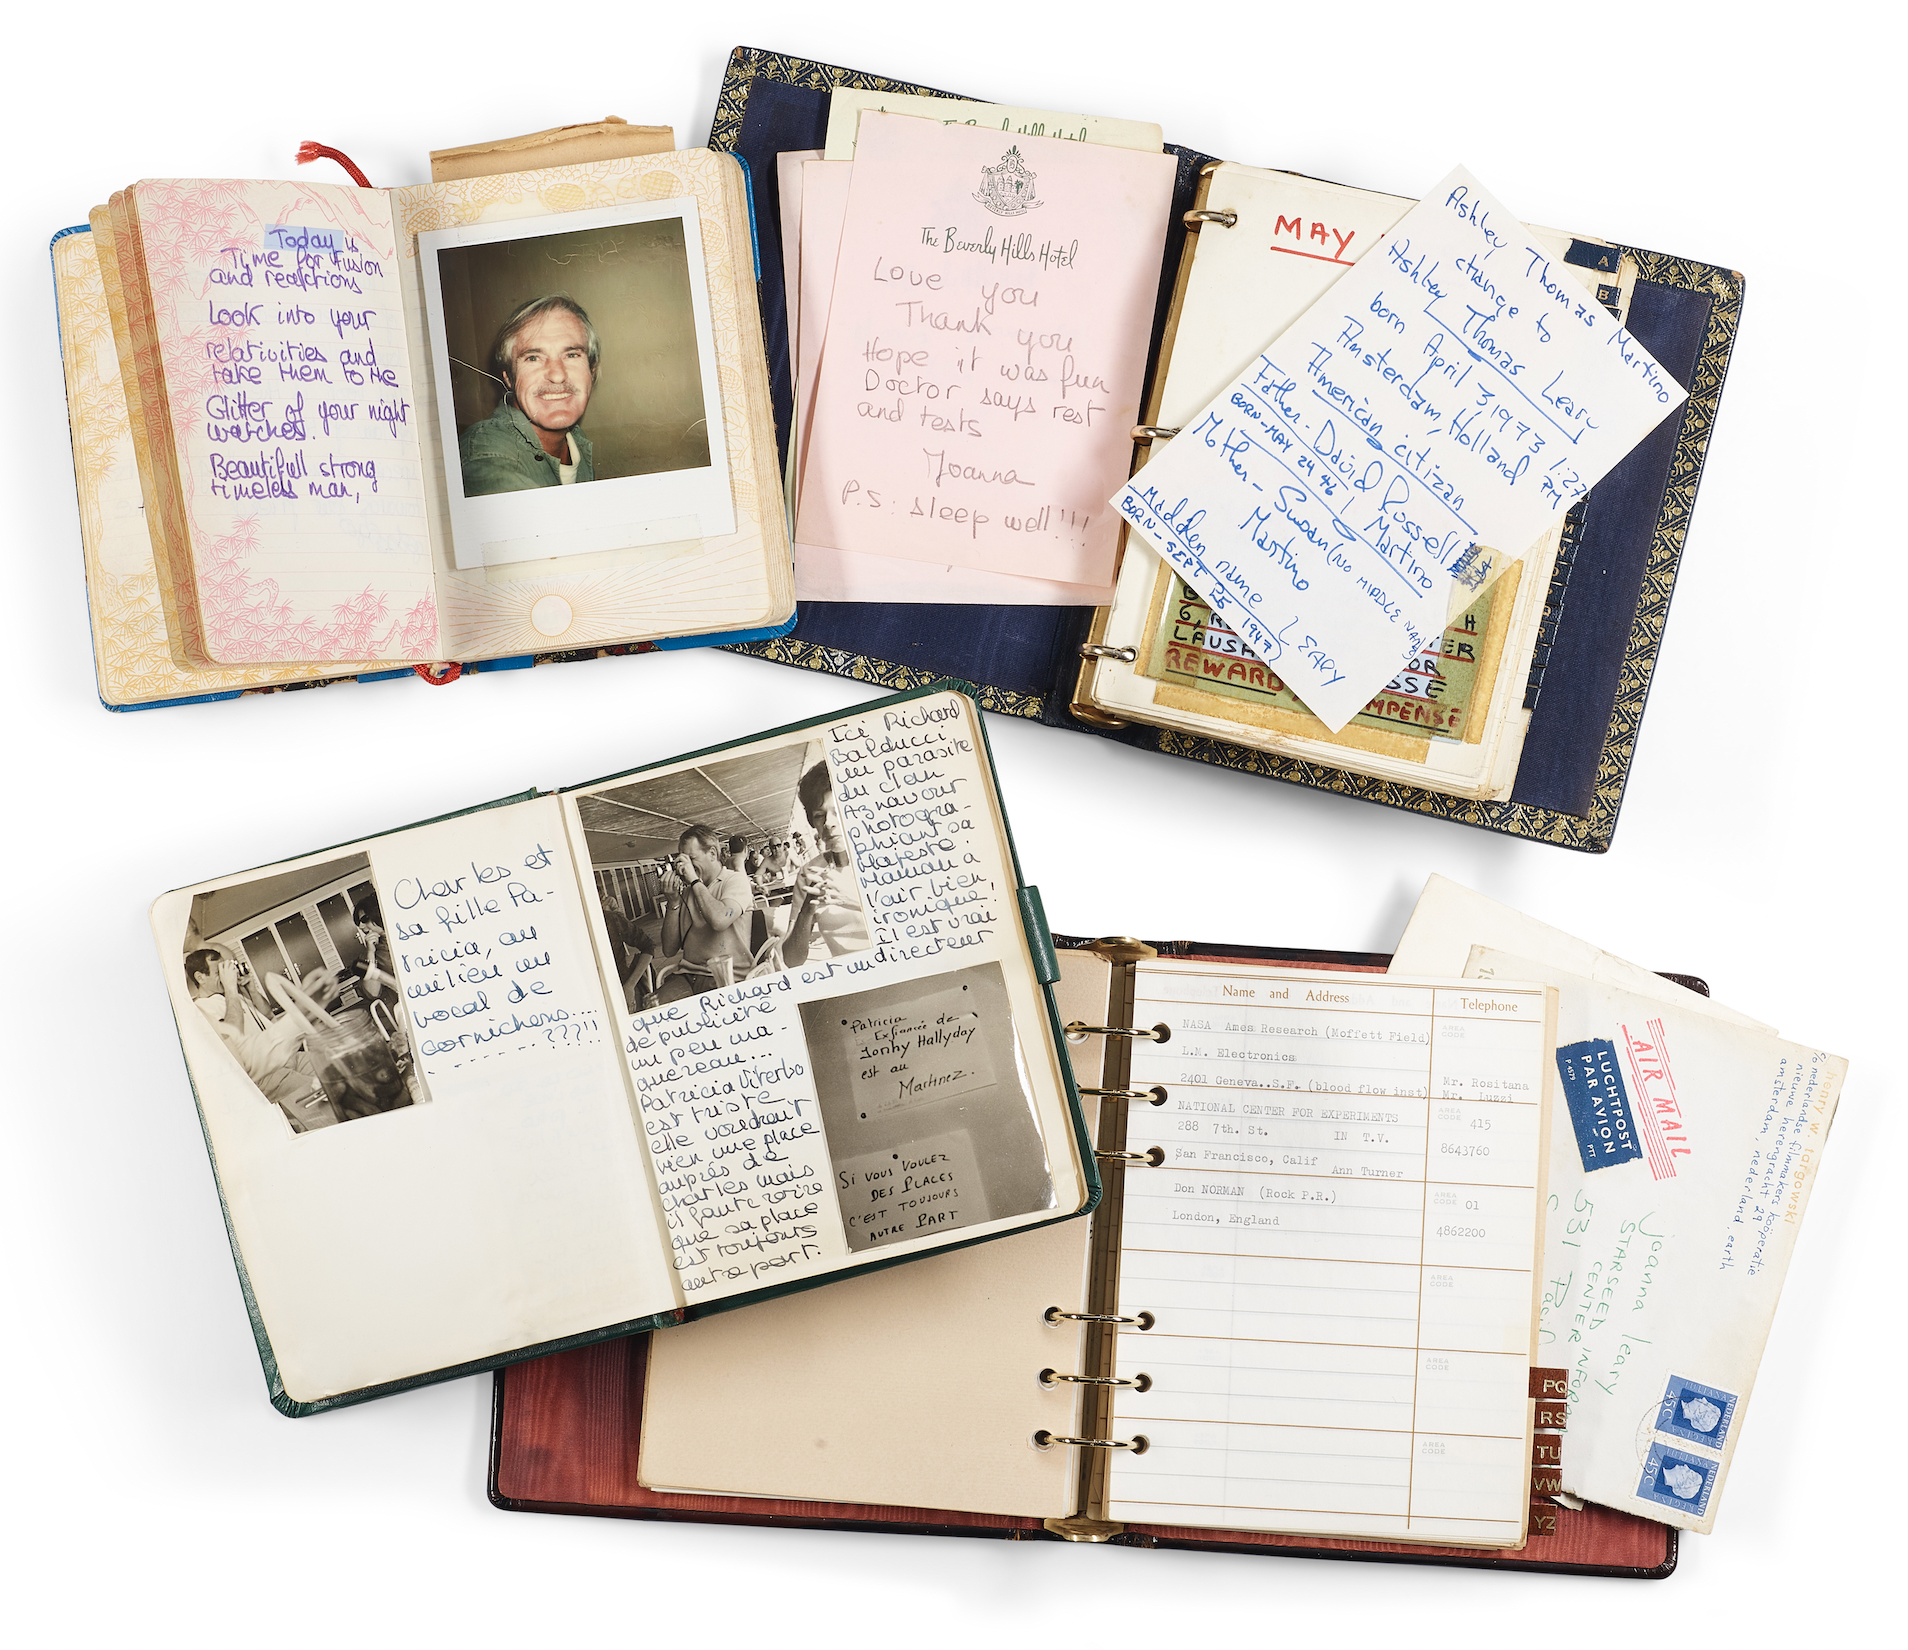 Timothy Leary archive from the estate of Joanna Harcourt-Smith, est. $40,000-$60,000. Image courtesy of Bonhams